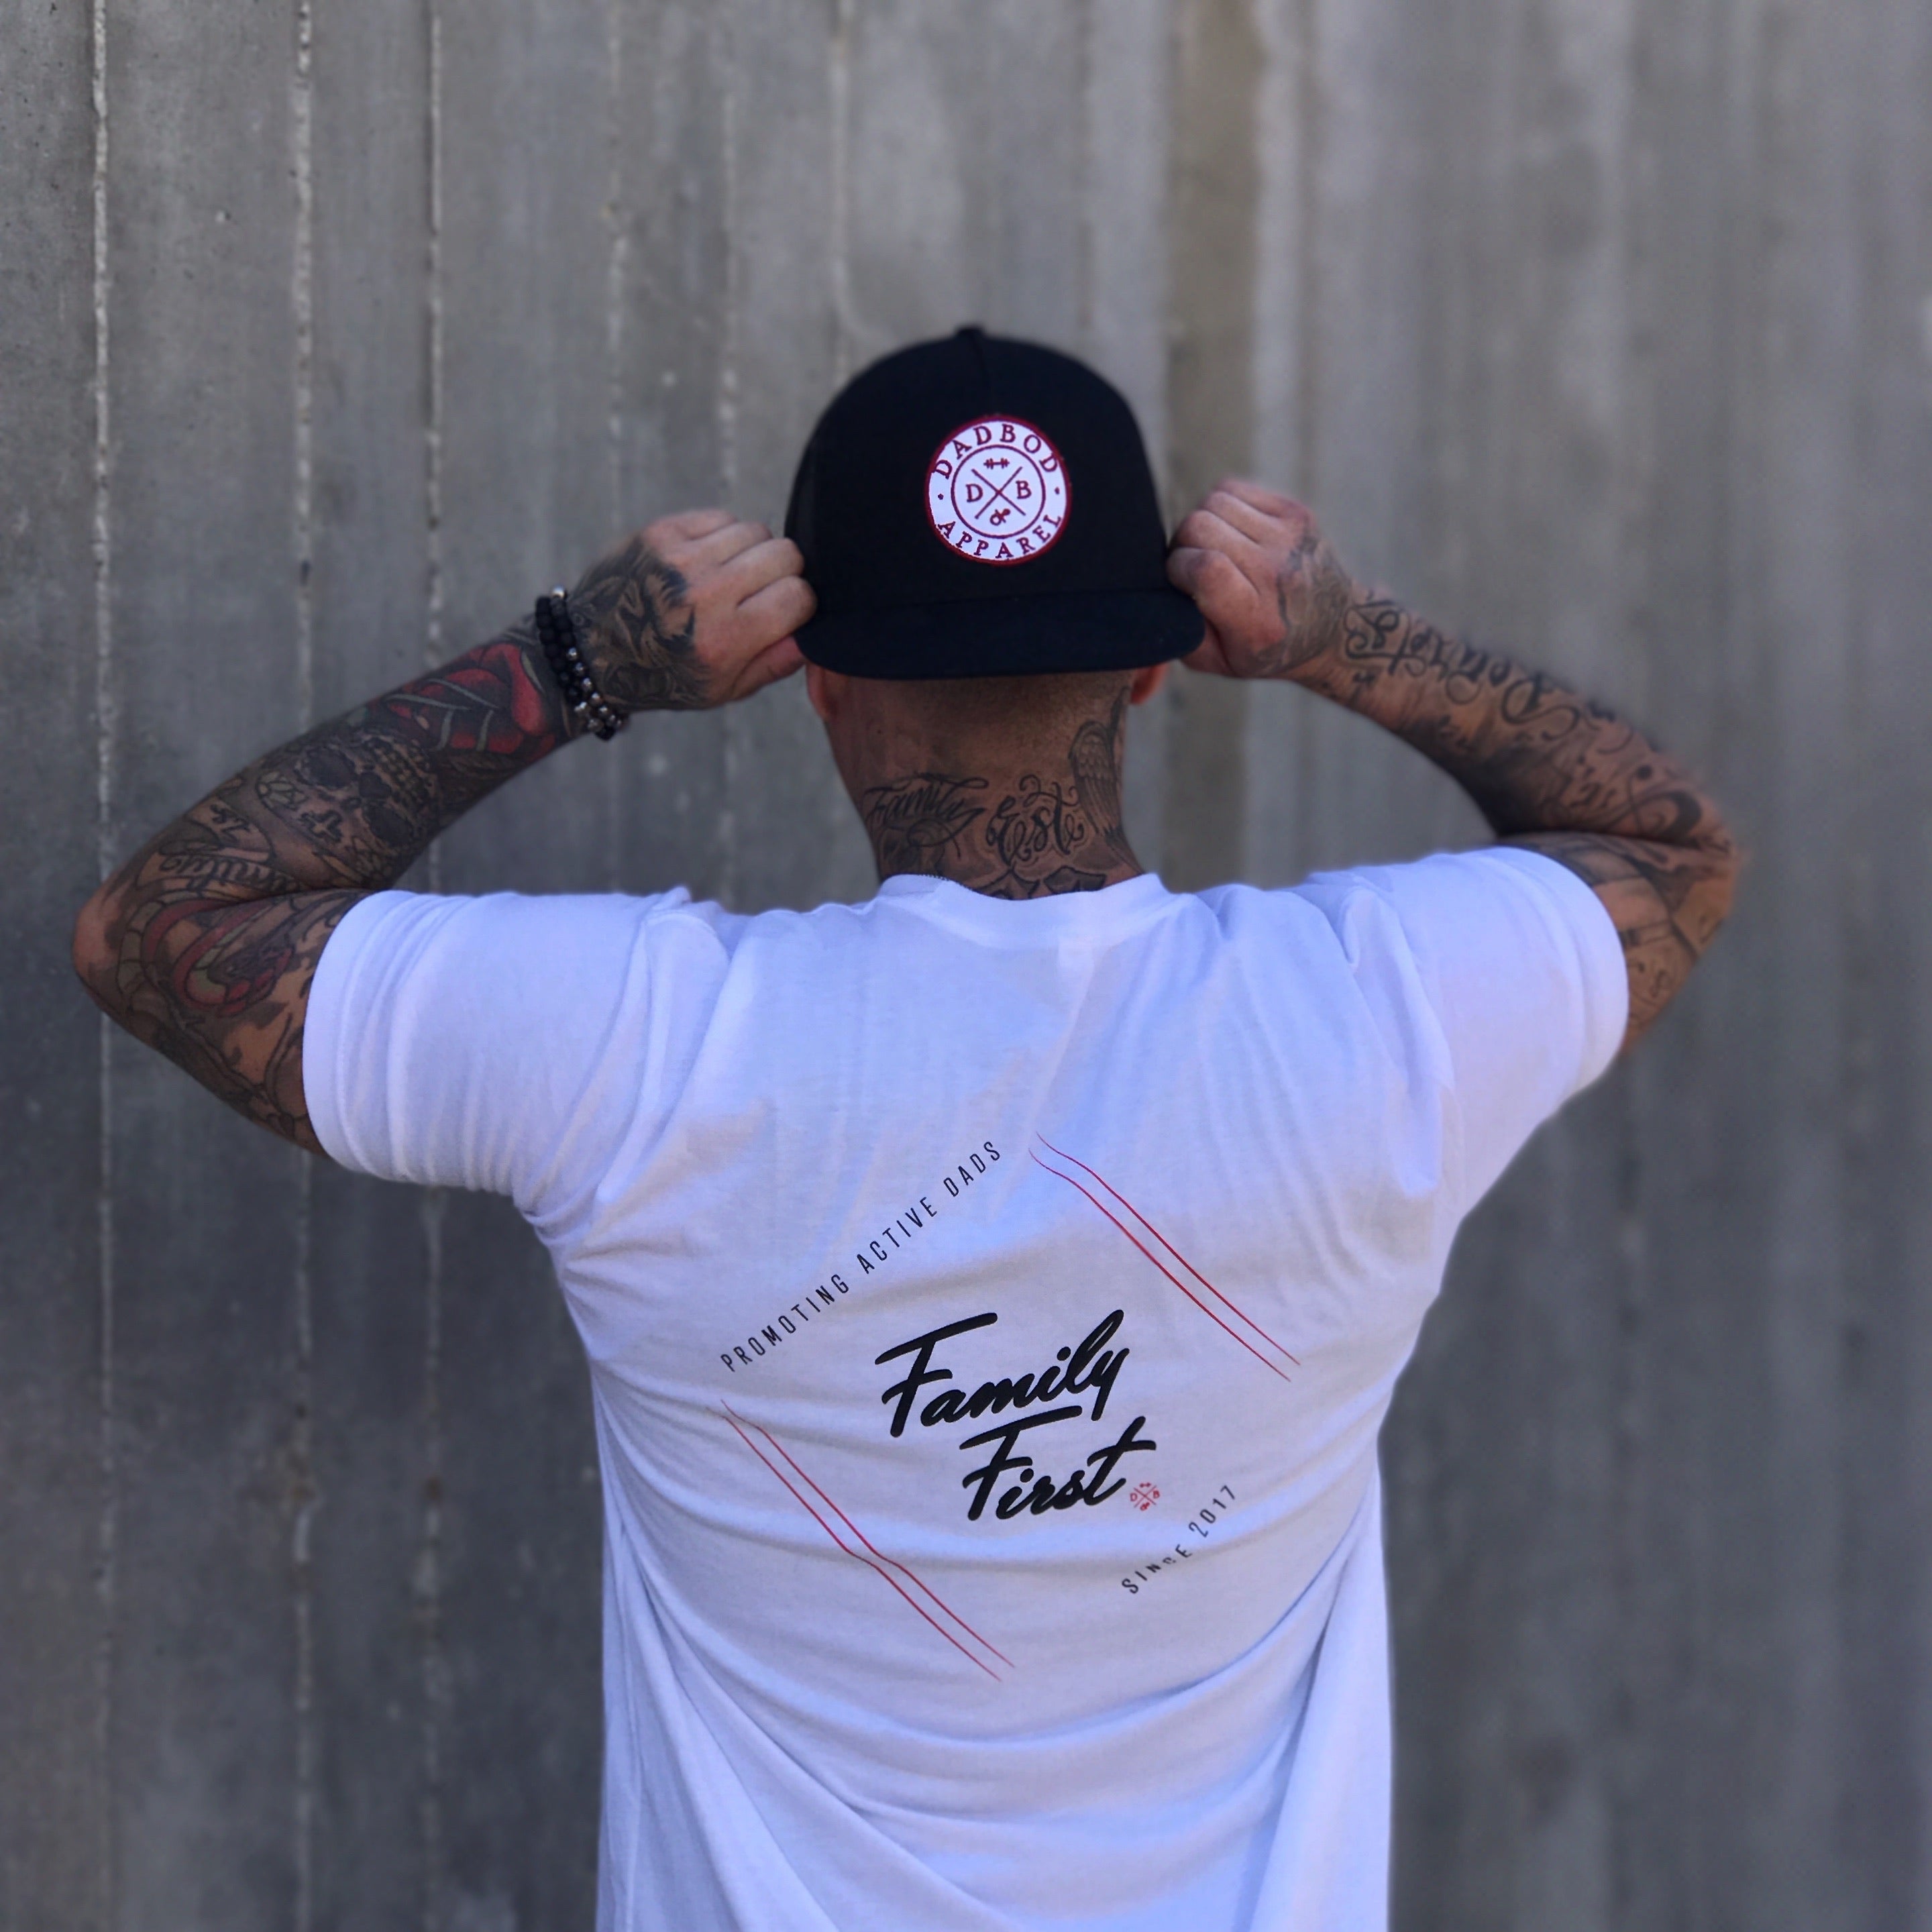 Family First Shirt (White)